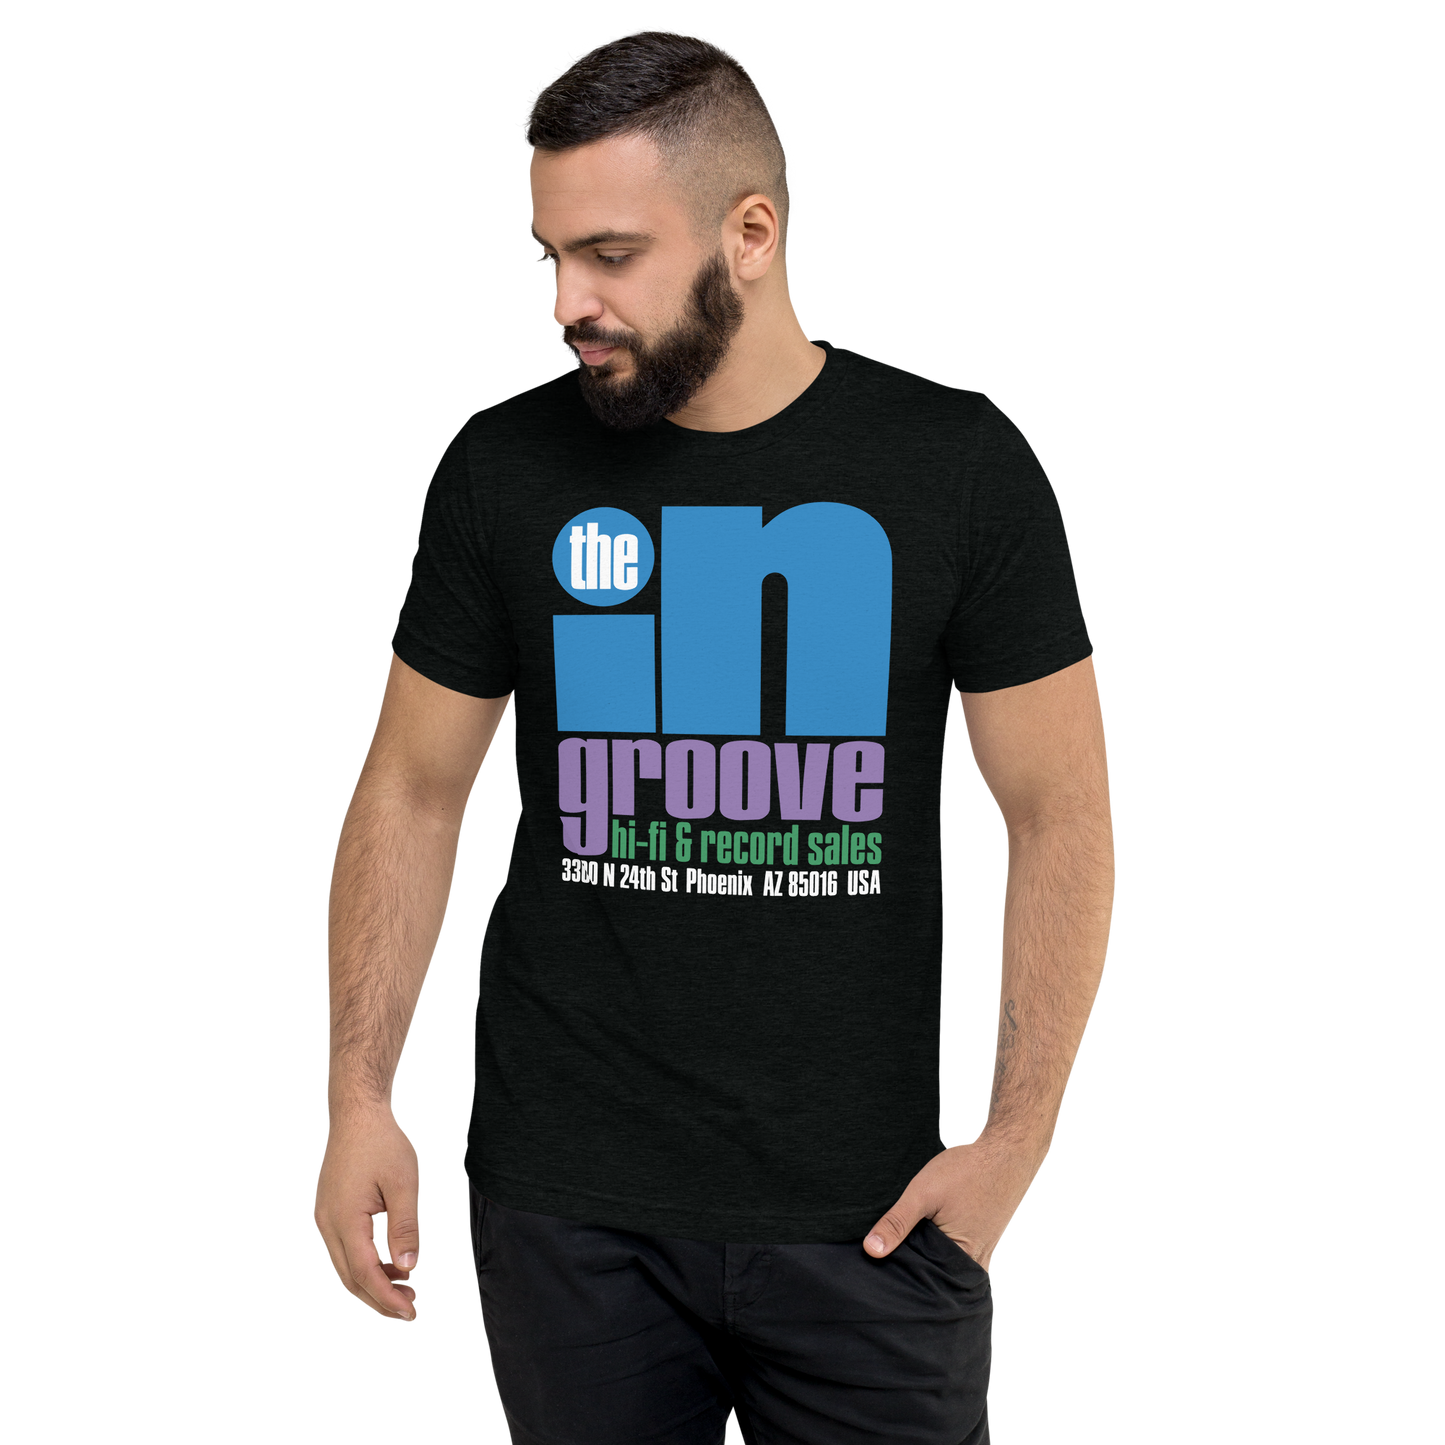 The 'In' Groove Record Store - Camiseta para hombre, color negro sólido